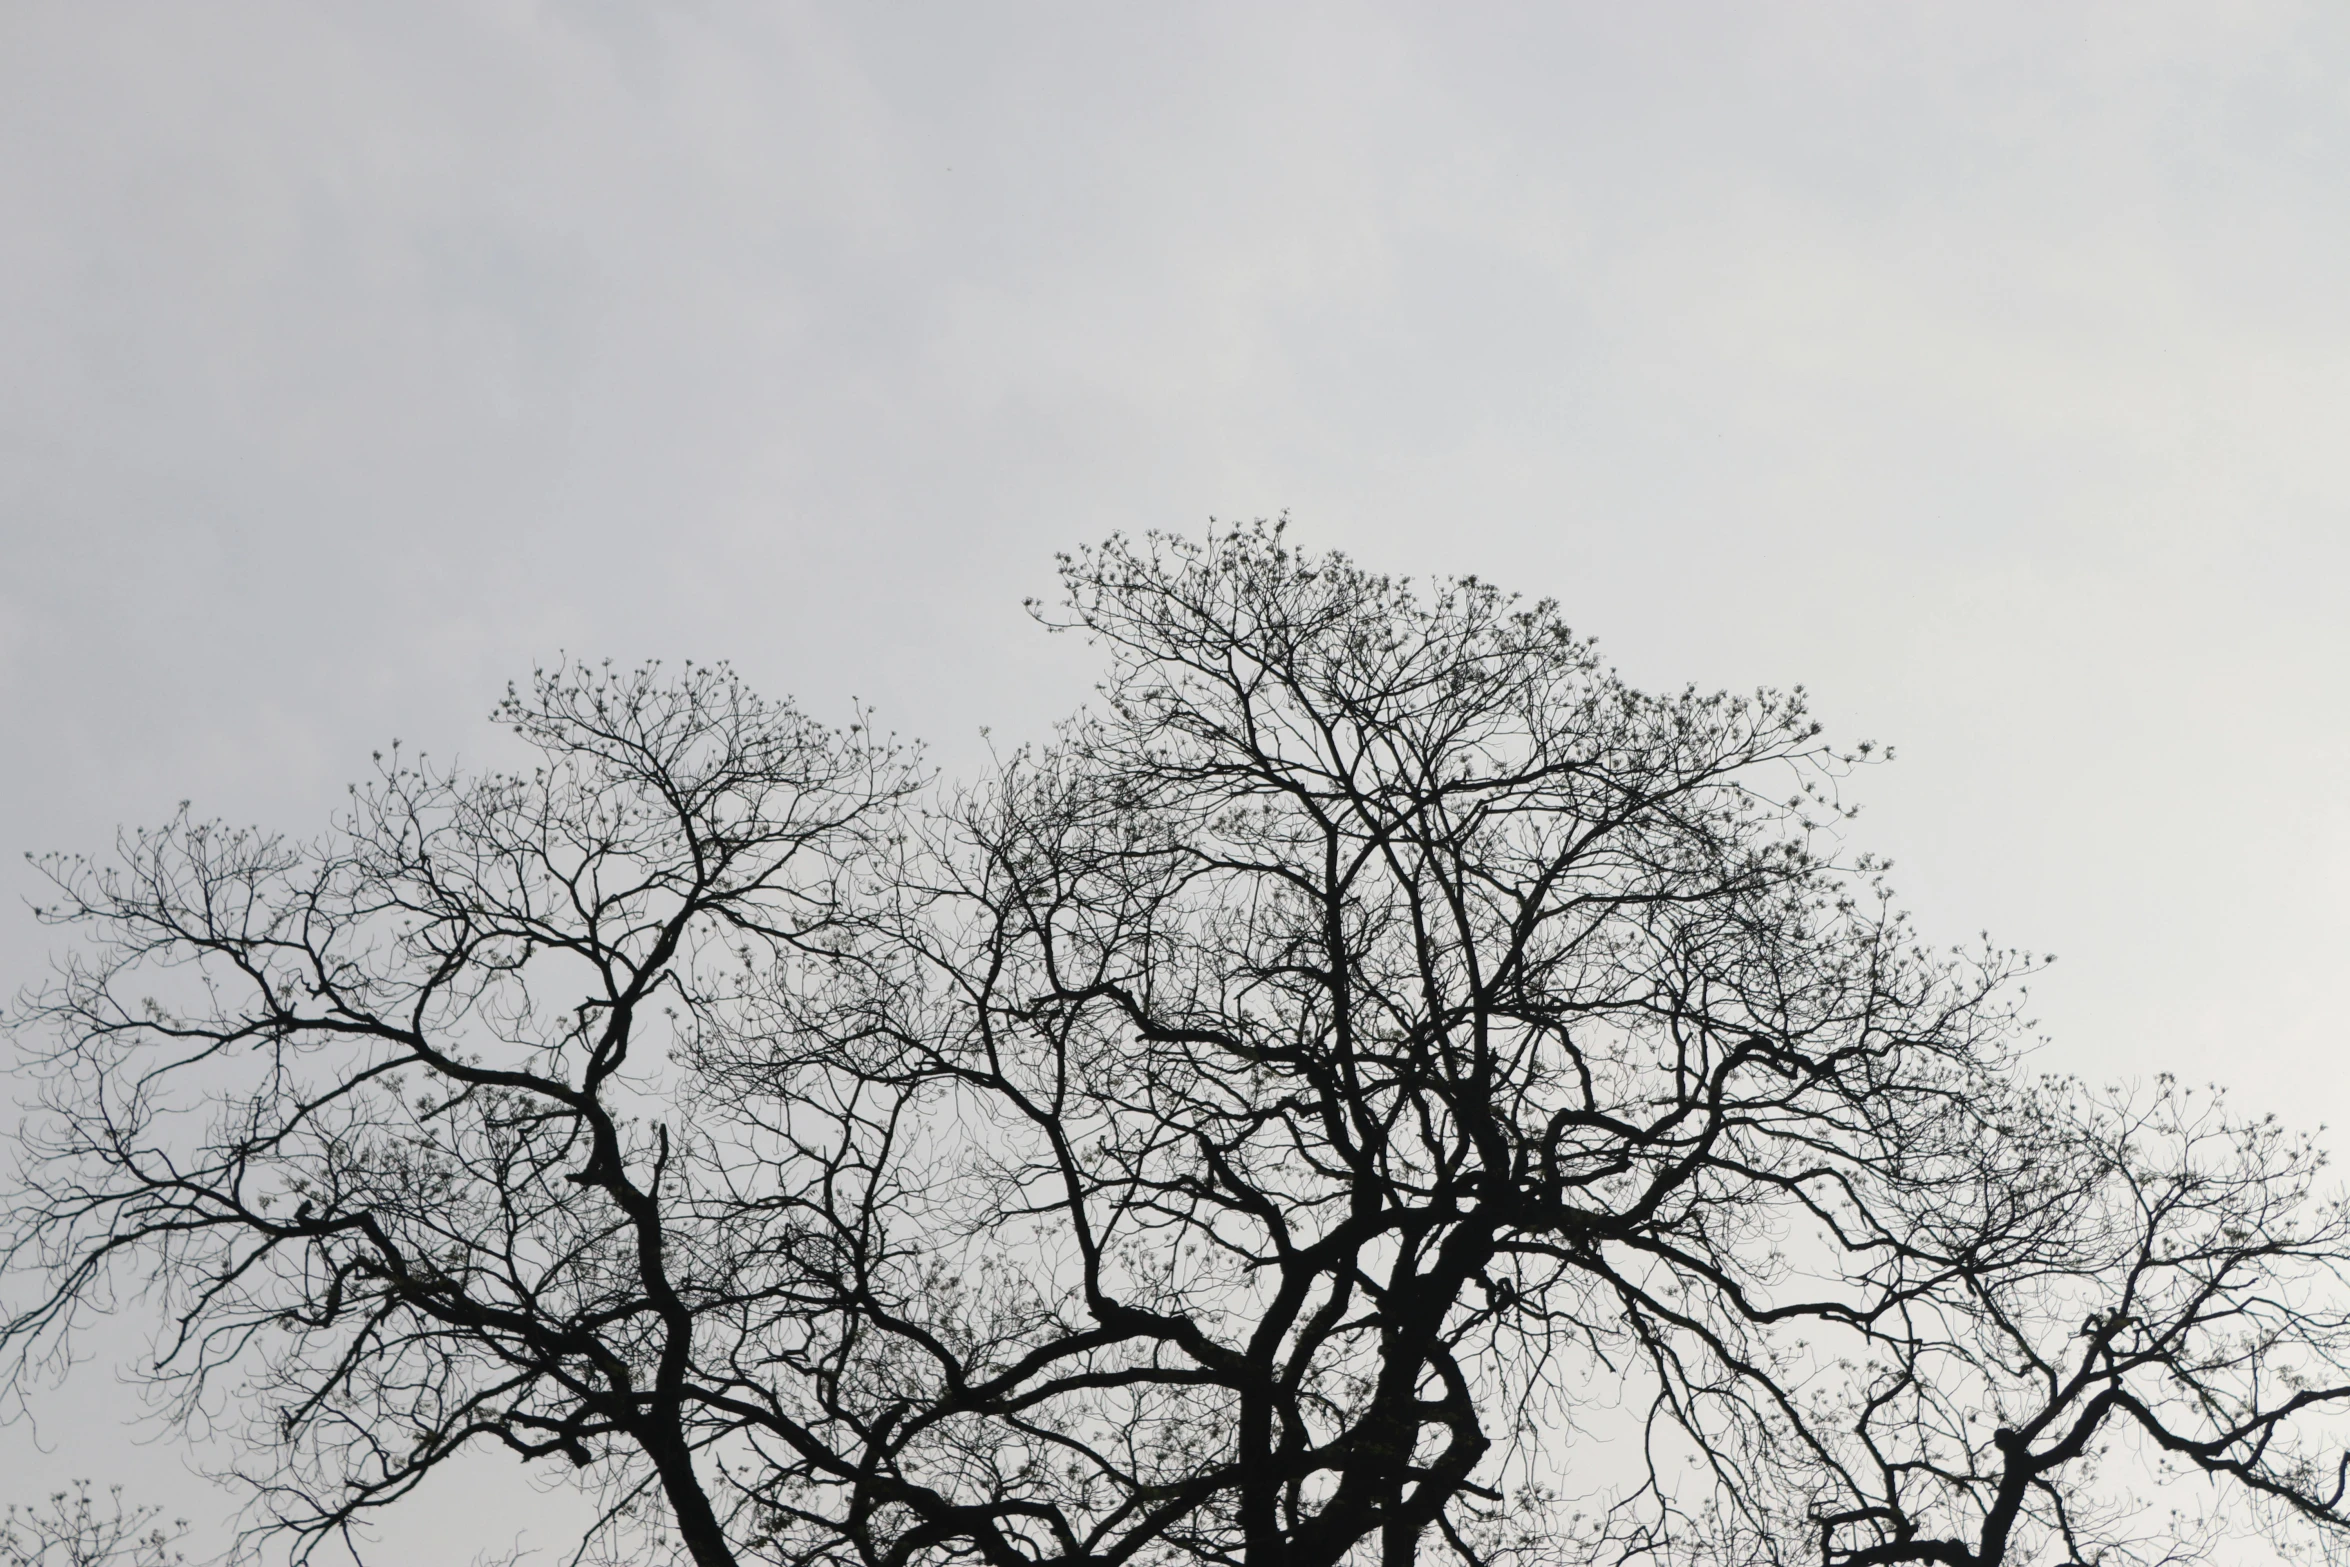 silhouette of tree with no leaves in foreground